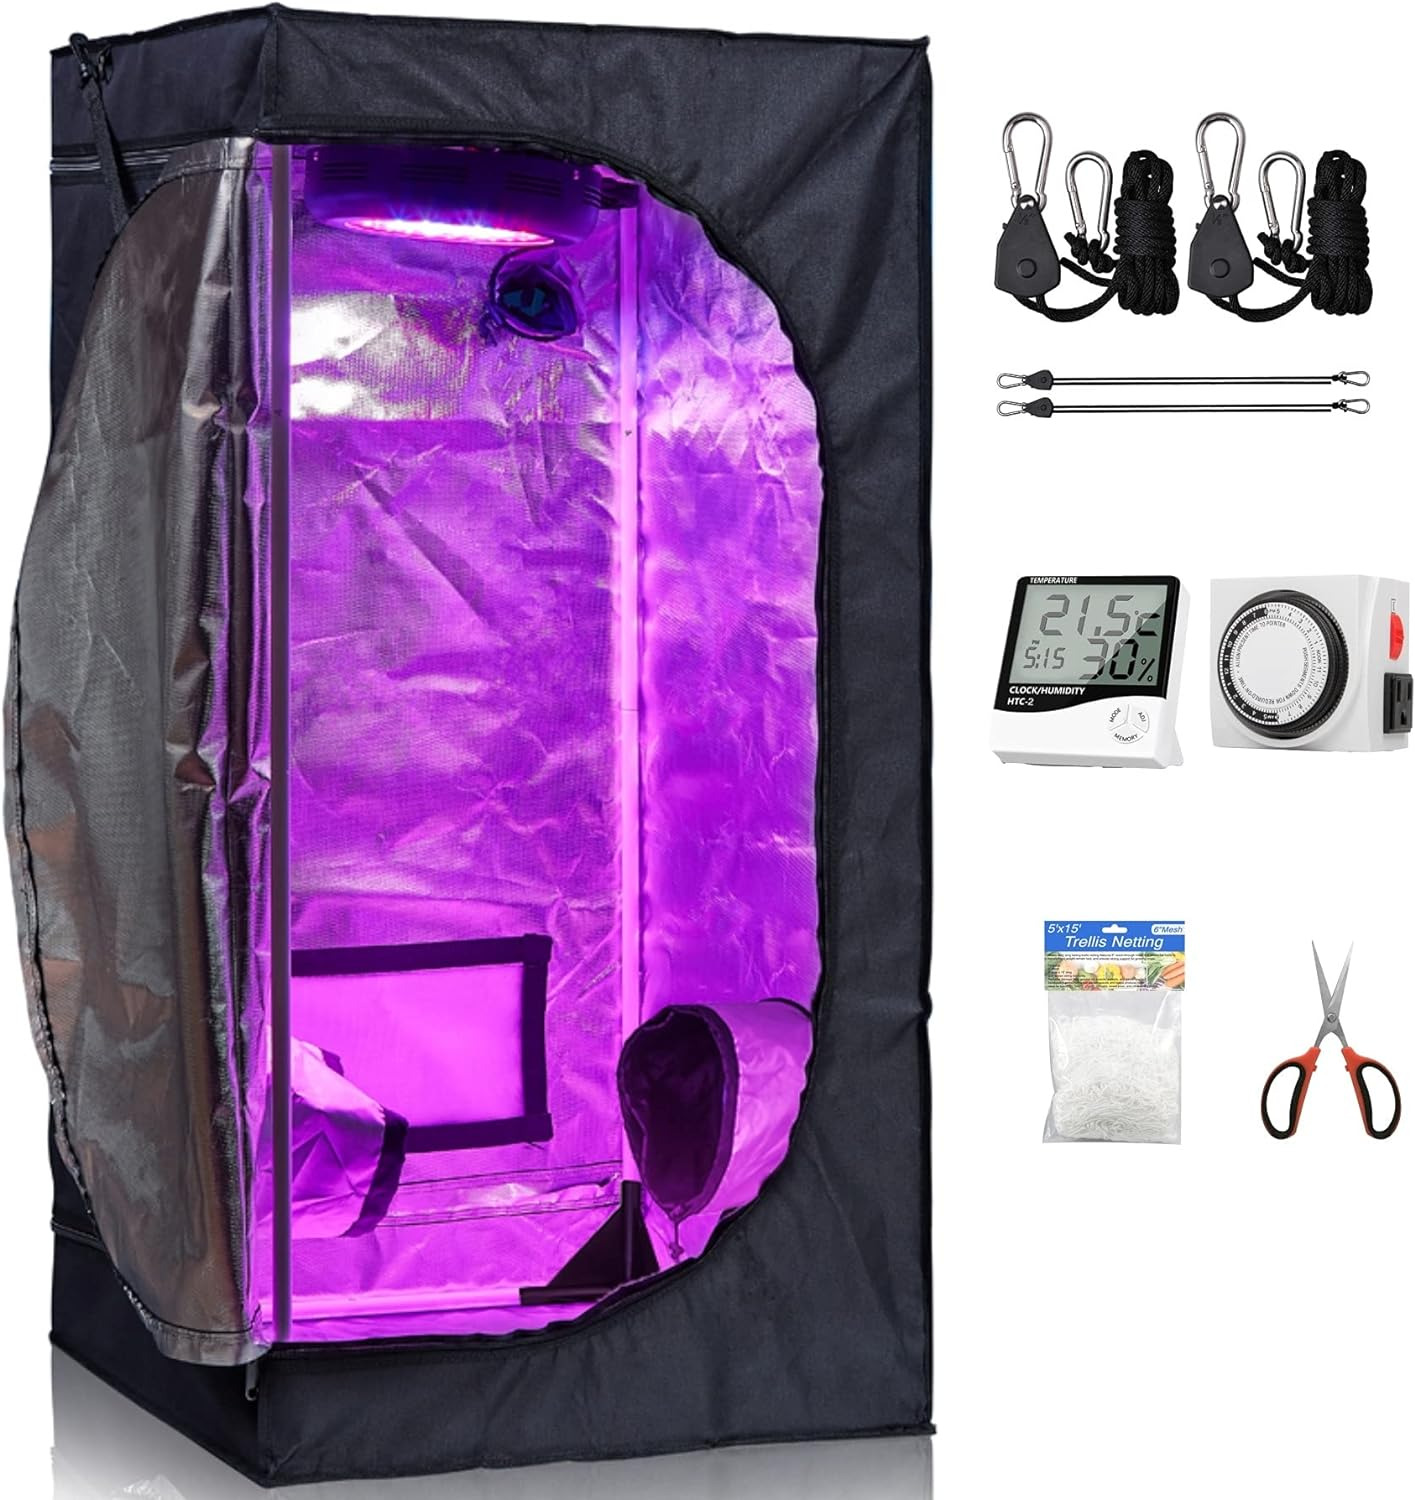 Hydroponic Kit Grow Tent Room Complete Kit 32